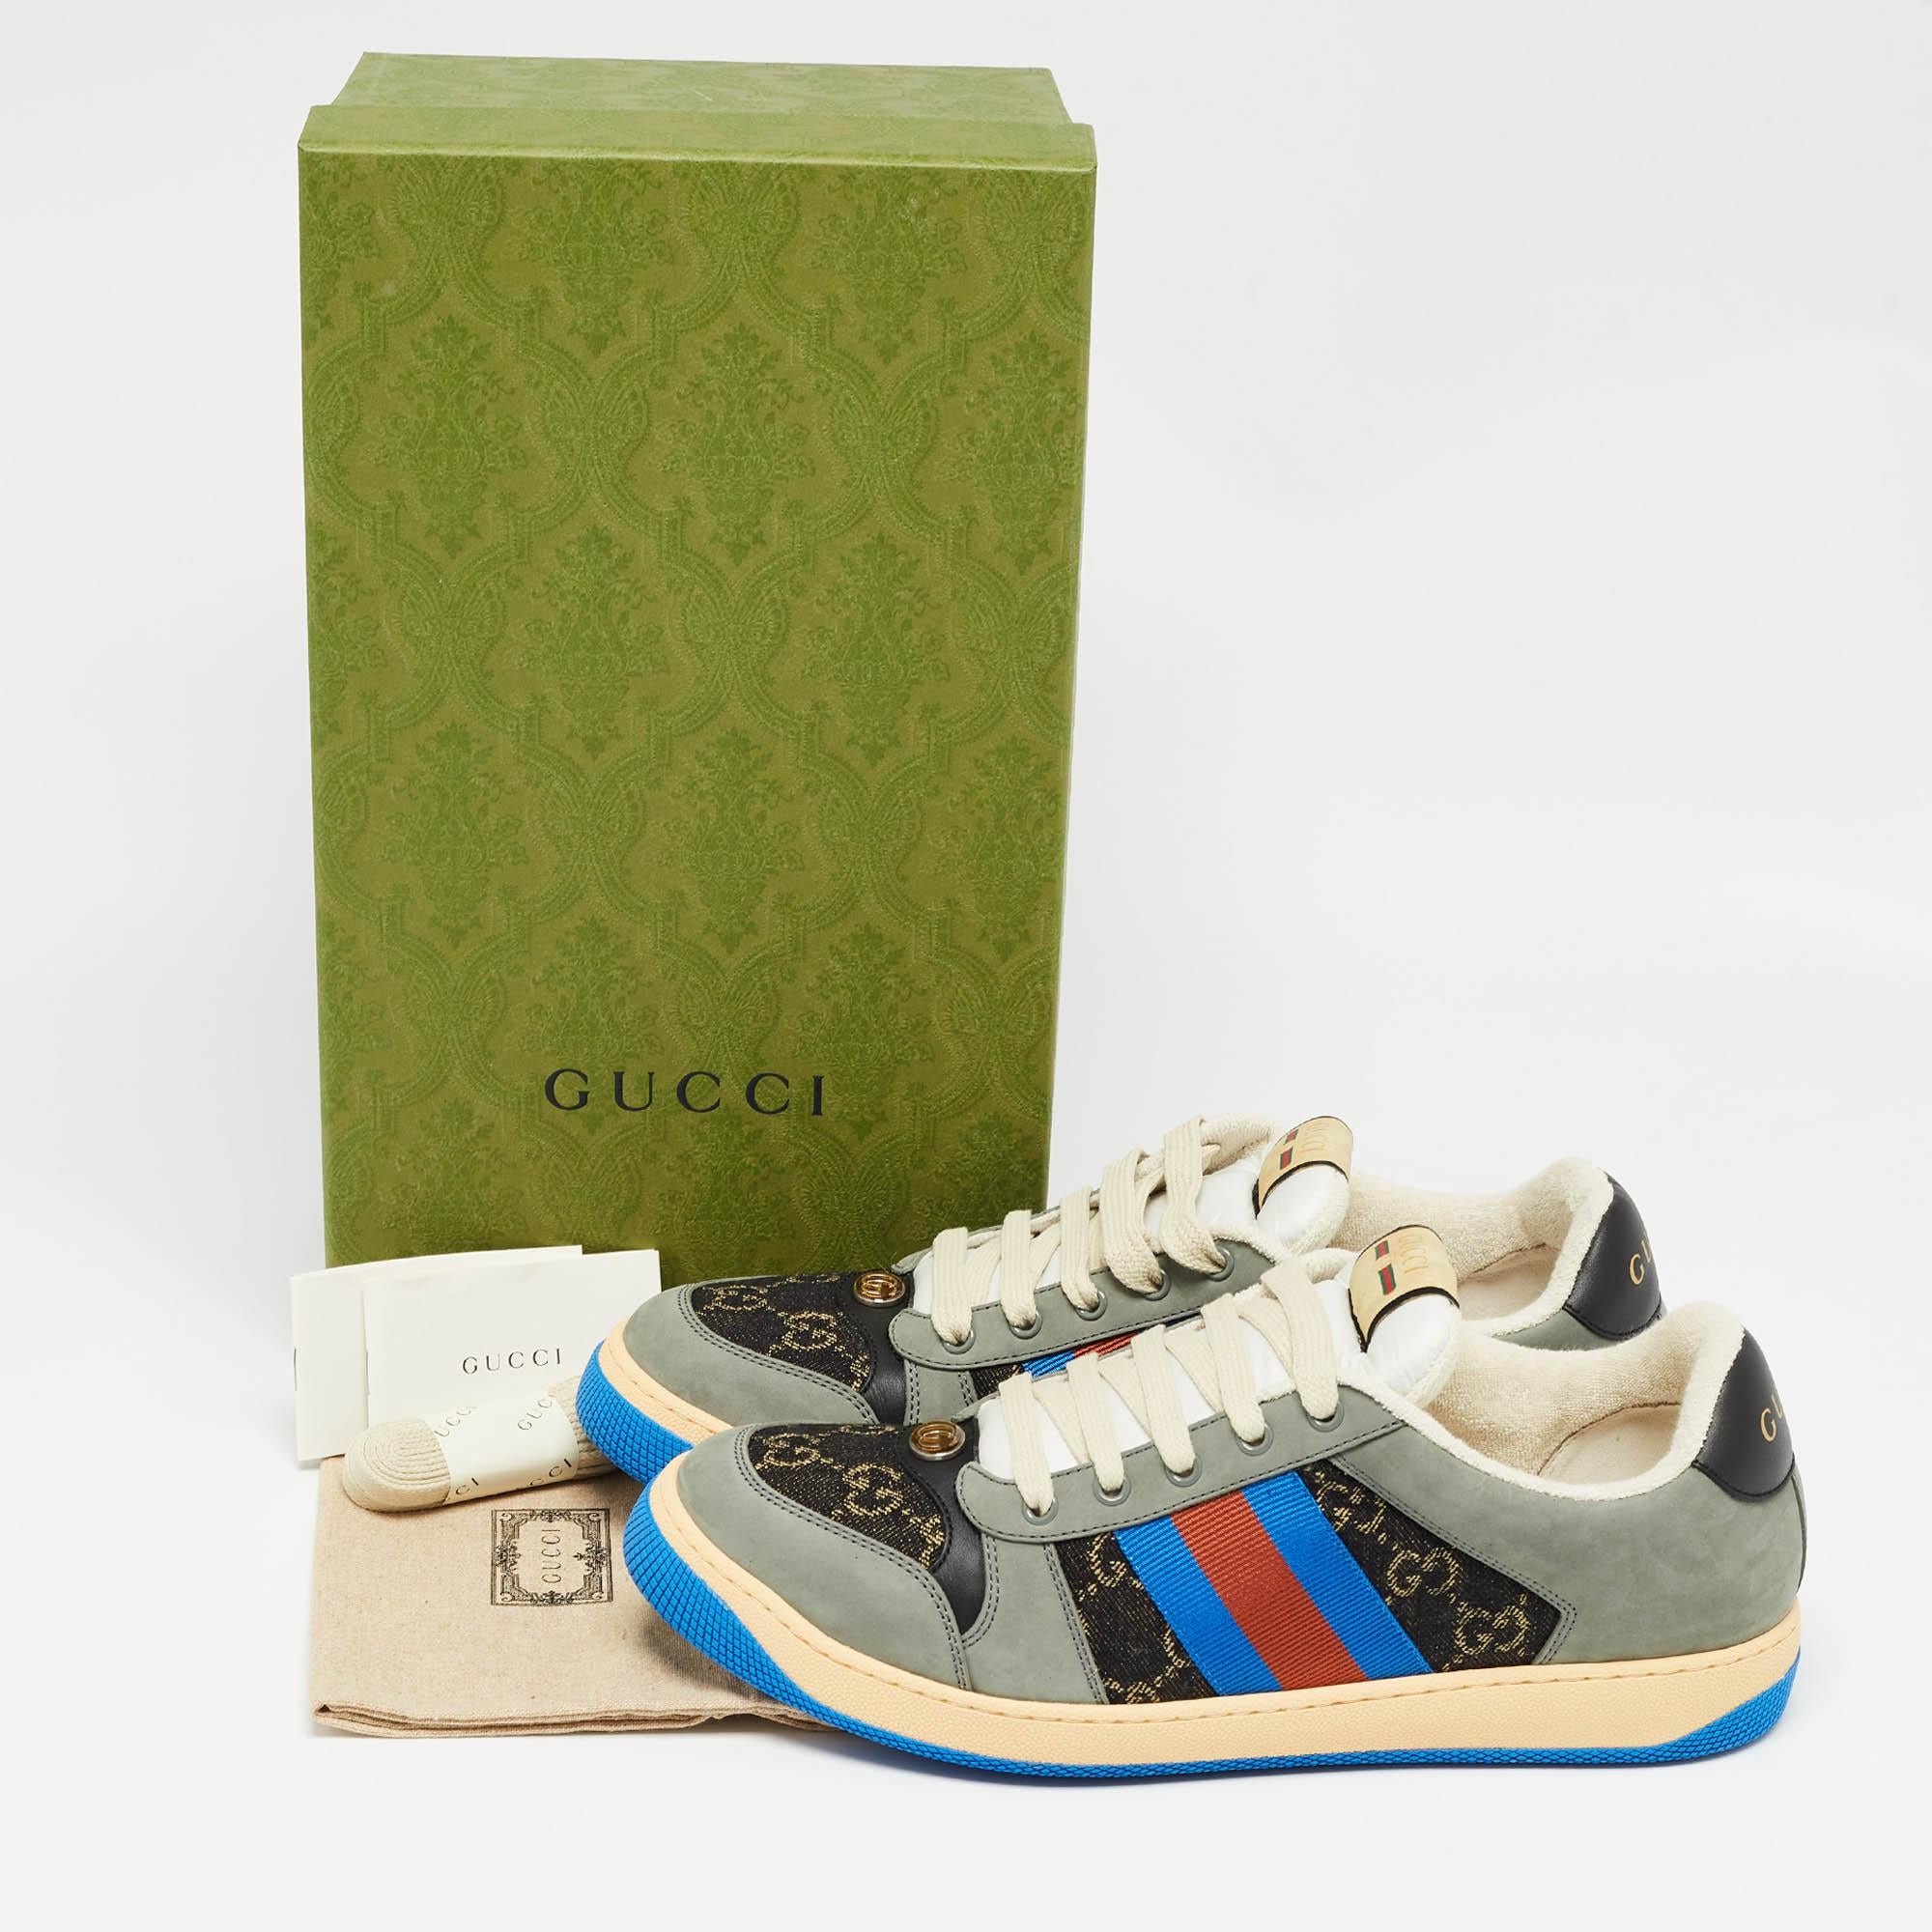 Gucci Multicolor GG Canvas and Nubuck Leather Screener Sneakers Size 44.5 5